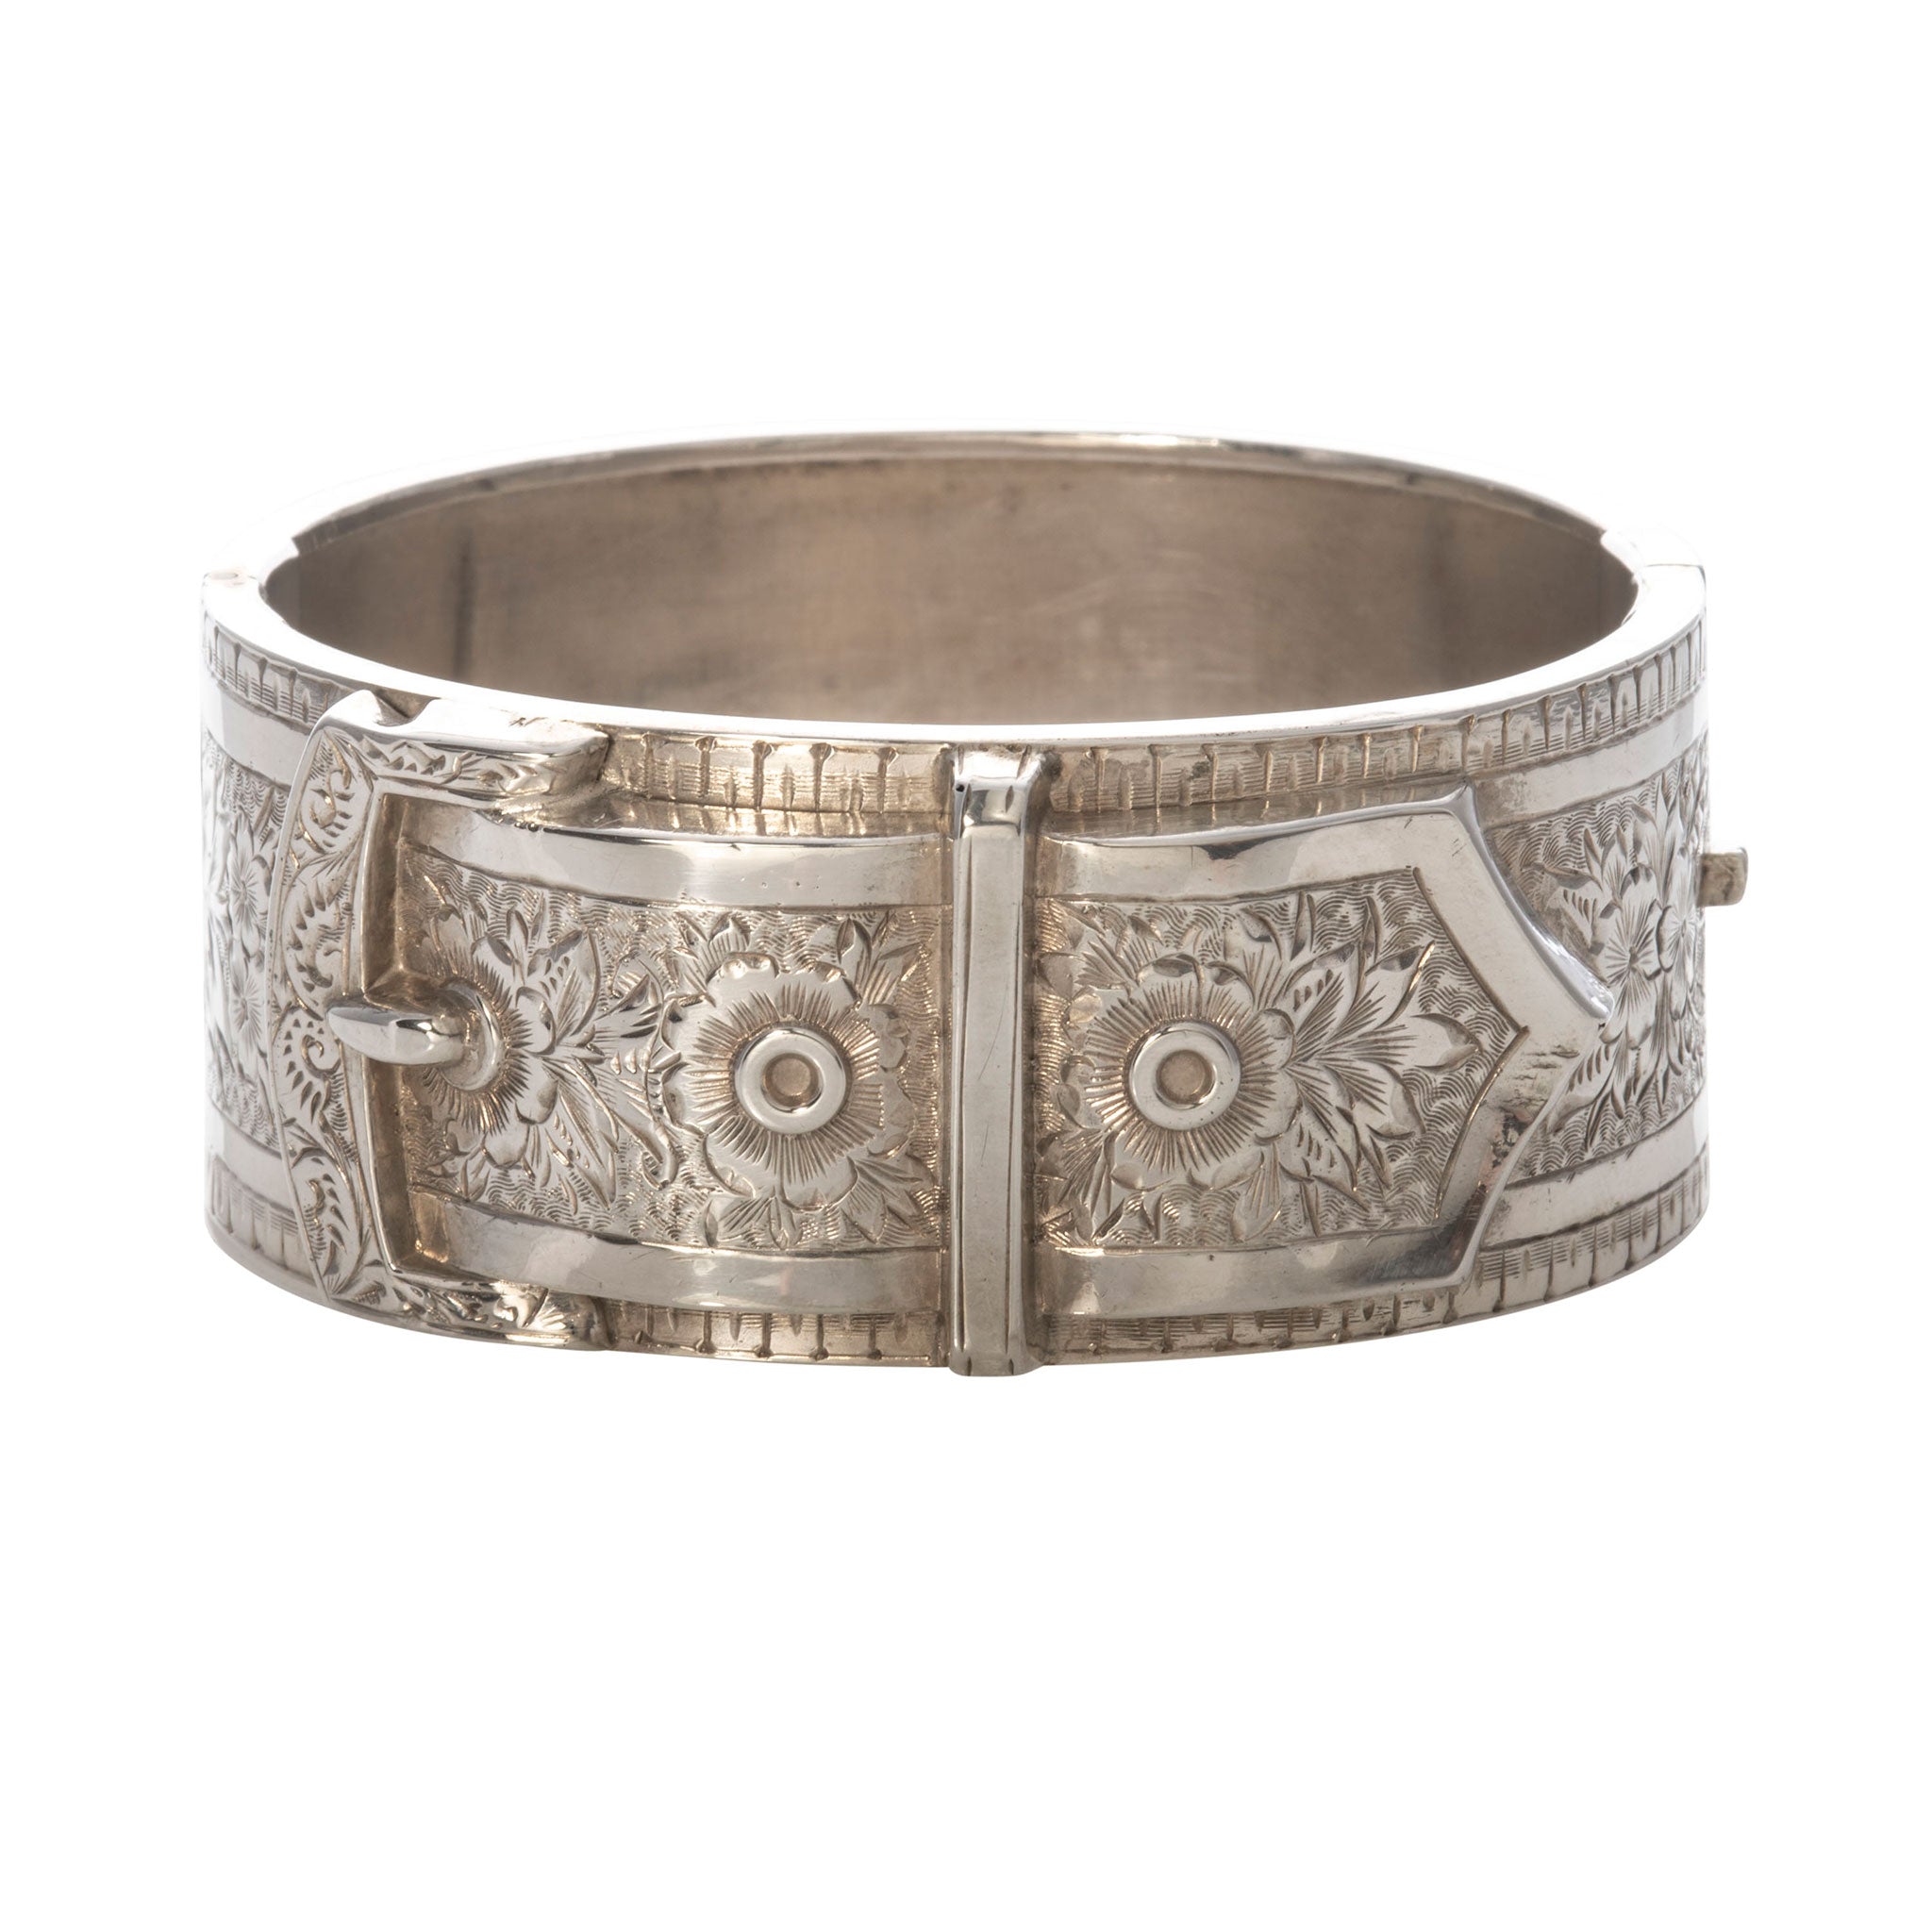 Victorian Aesthetic Silver Wide Buckle Cuff Bangle